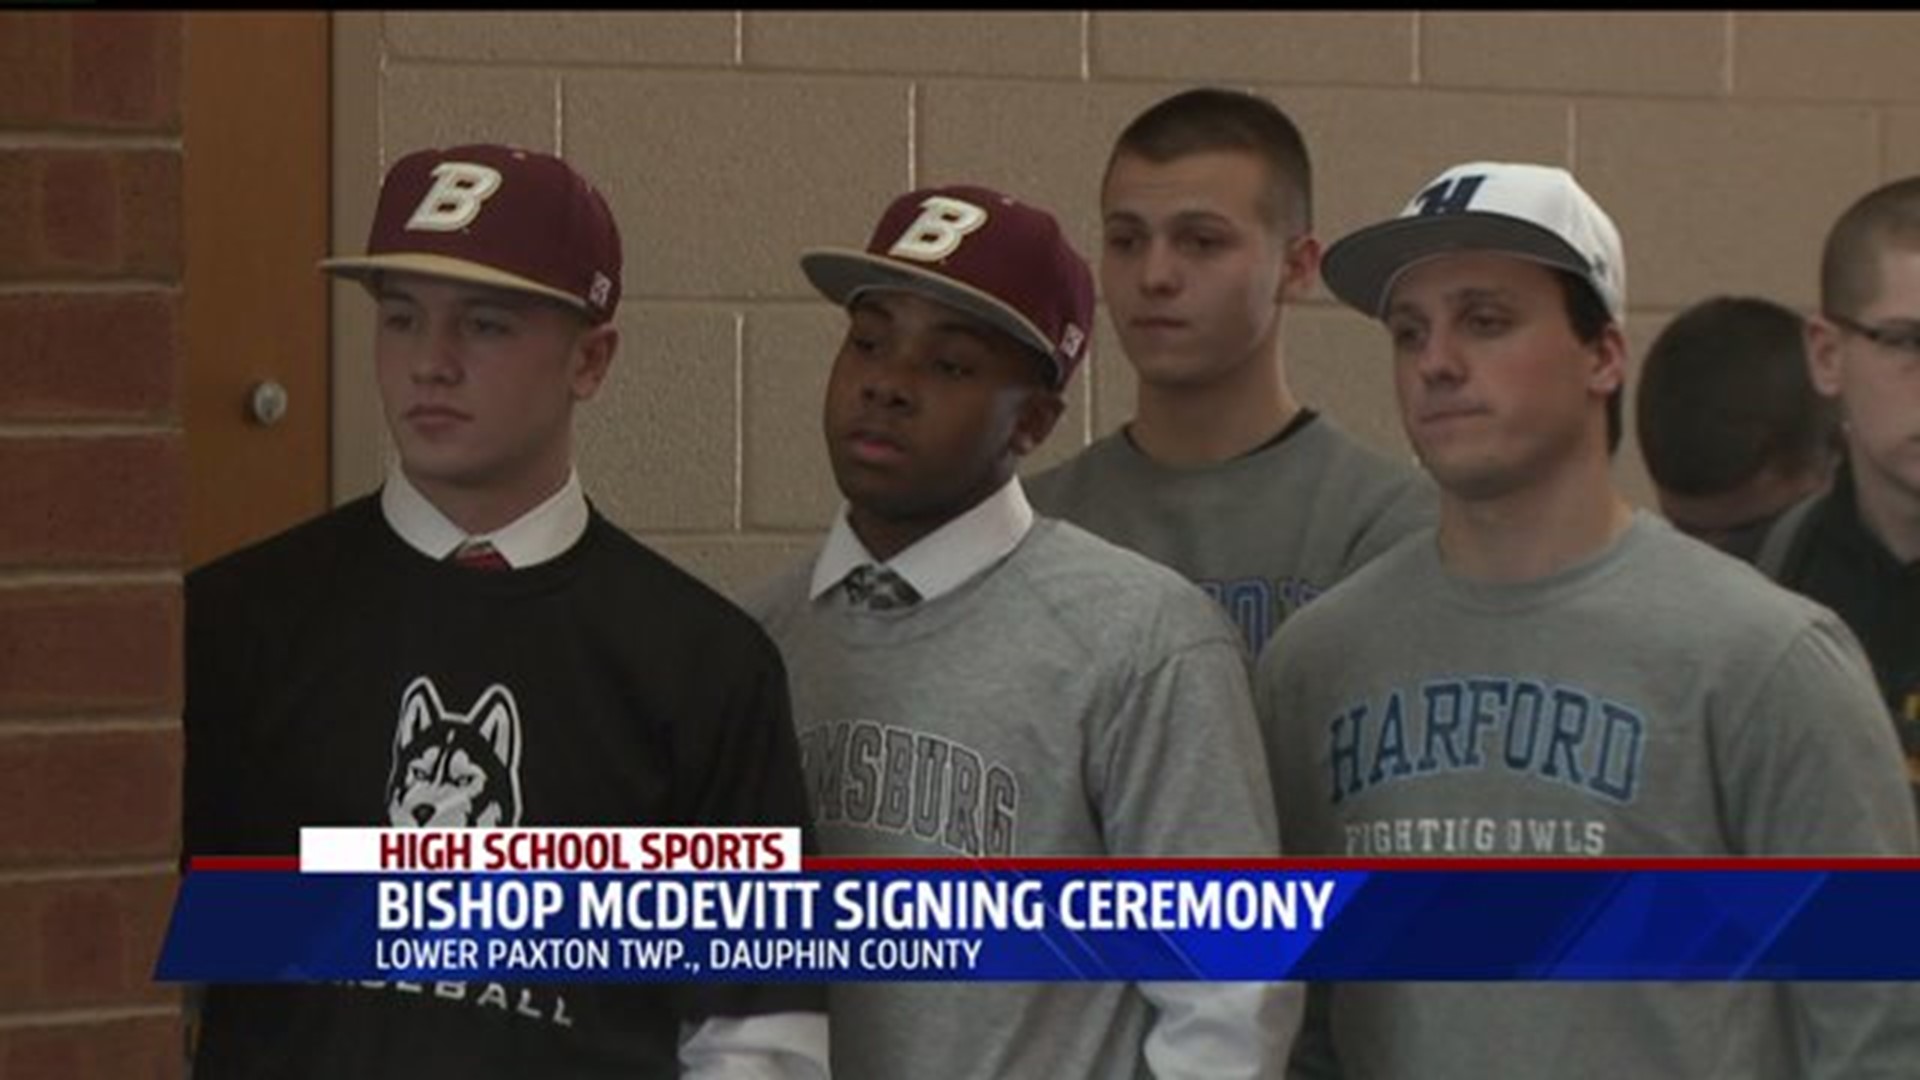 Local athletes on signing day